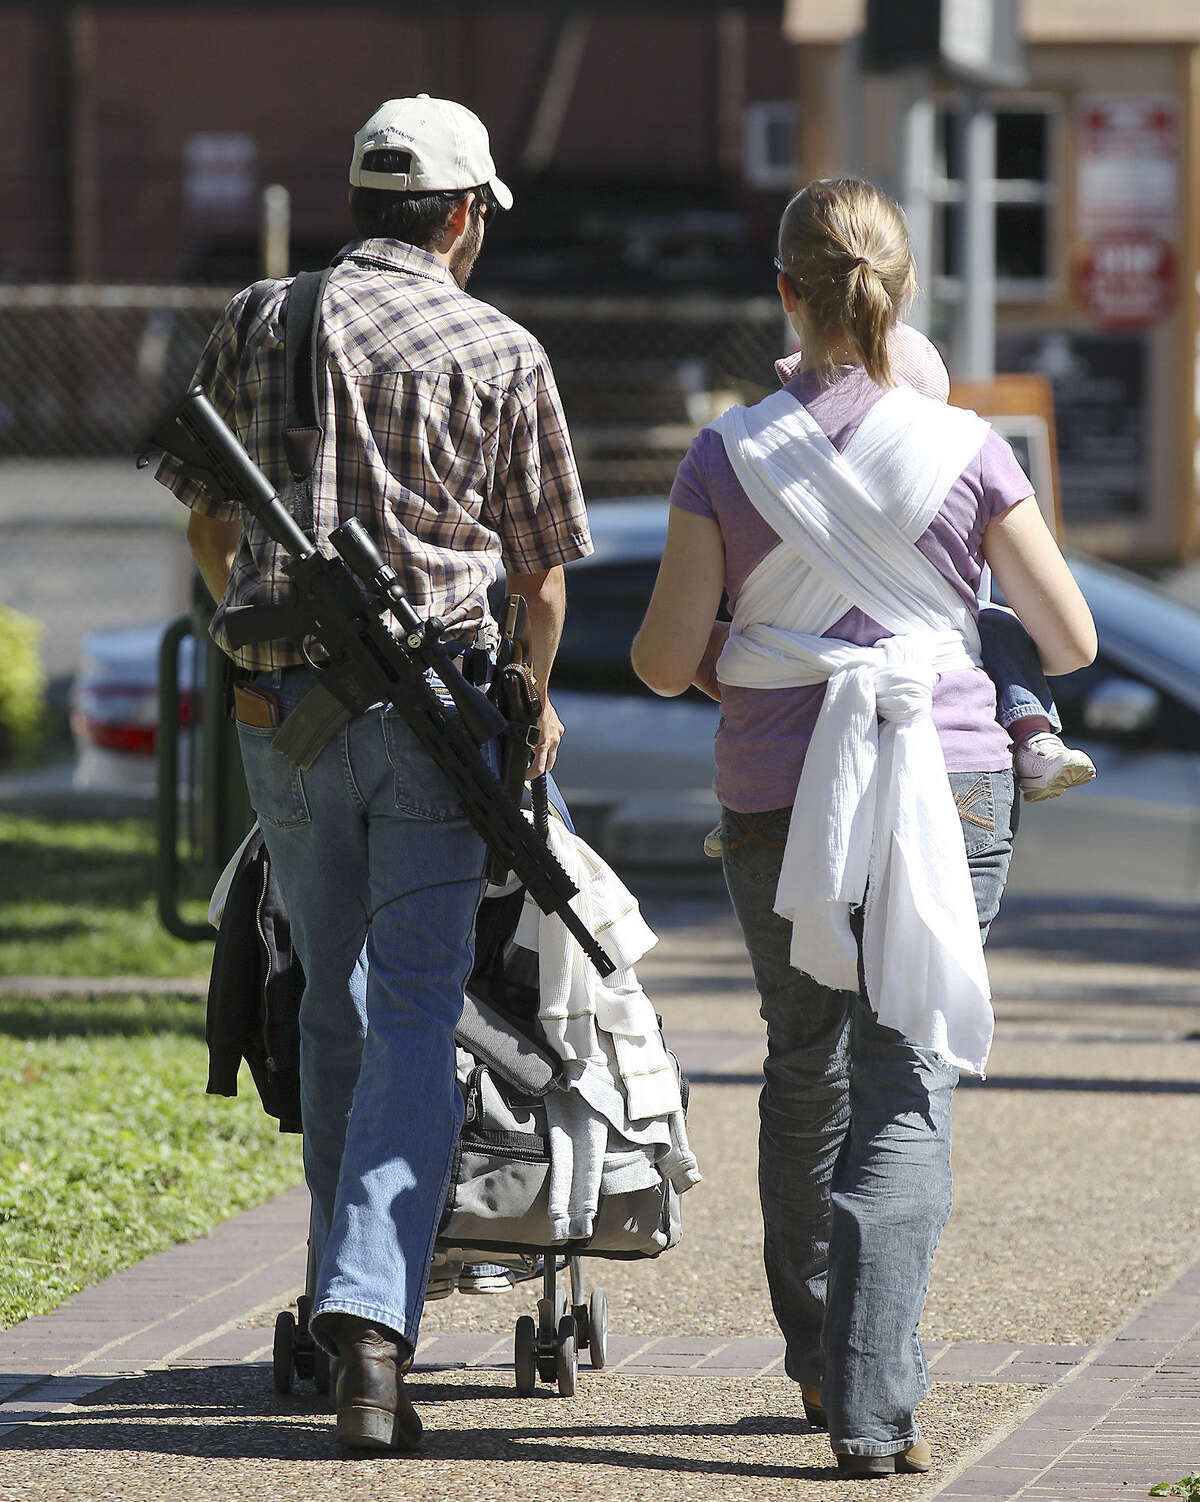 Participants leave a gun-rights rally at Travis Park in October. Advocates of open carrying of handguns have also staged armed protests at the Texas Capitol and along the Red River.